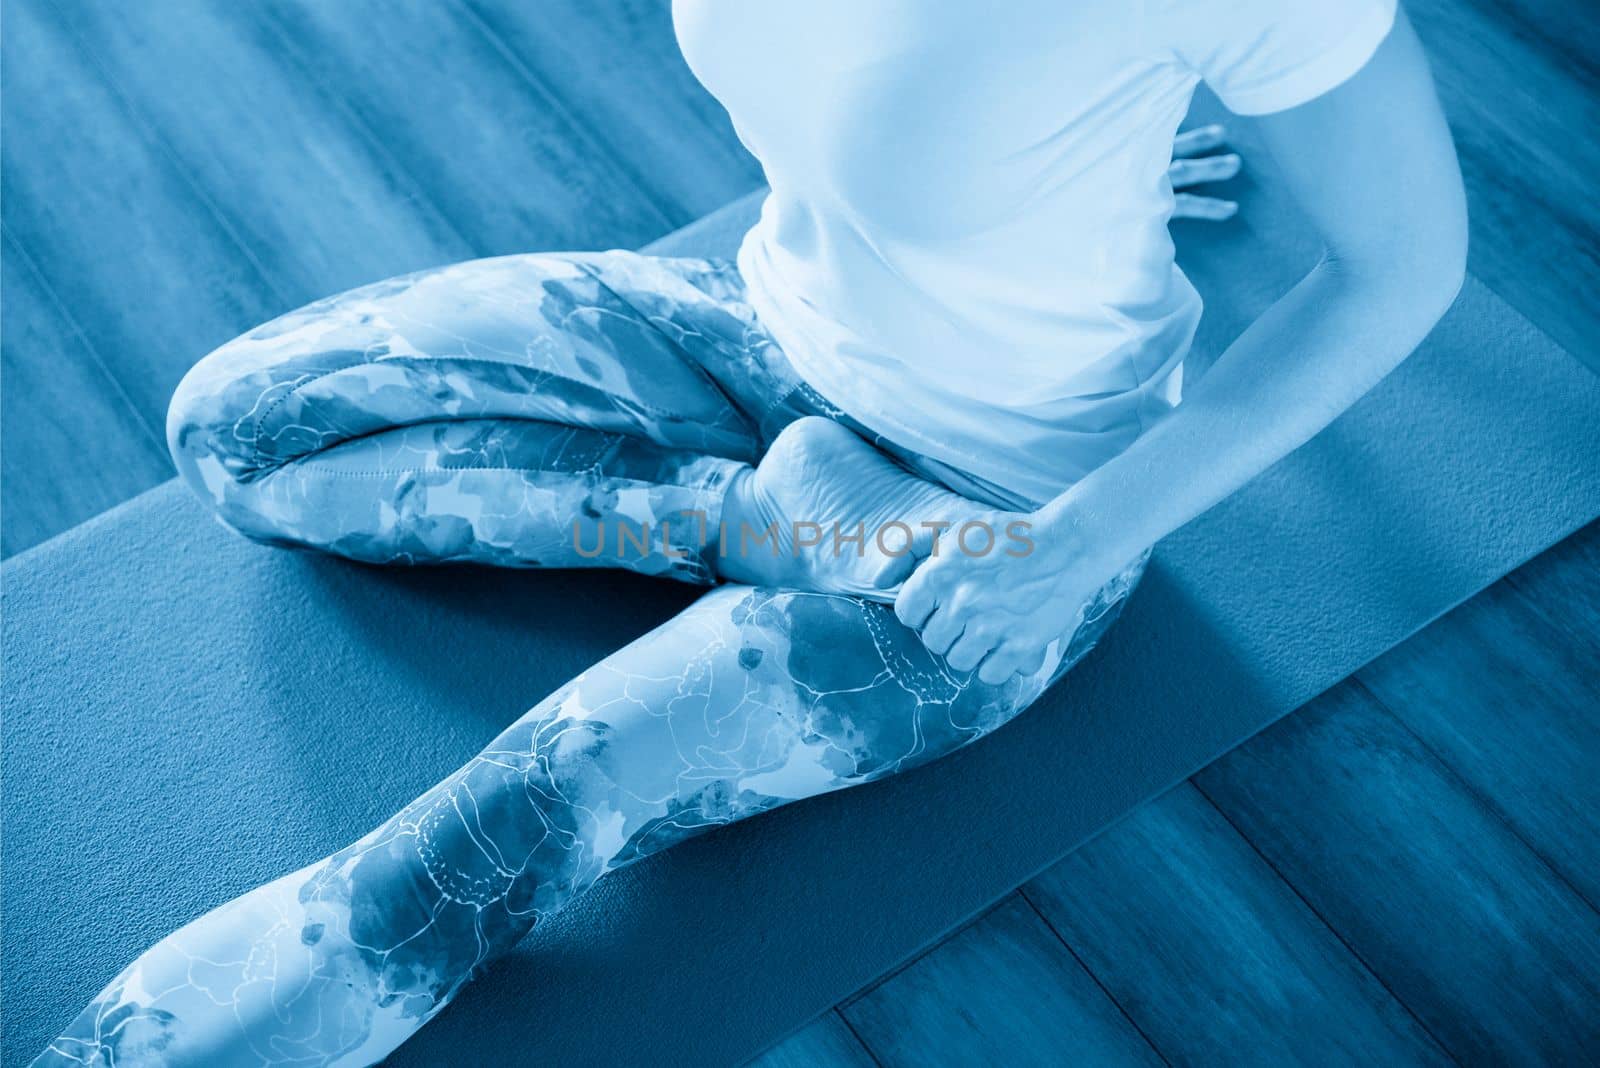 fitness, sport, training and lifestyle concept - woman stretching on mat in gym by Mariakray